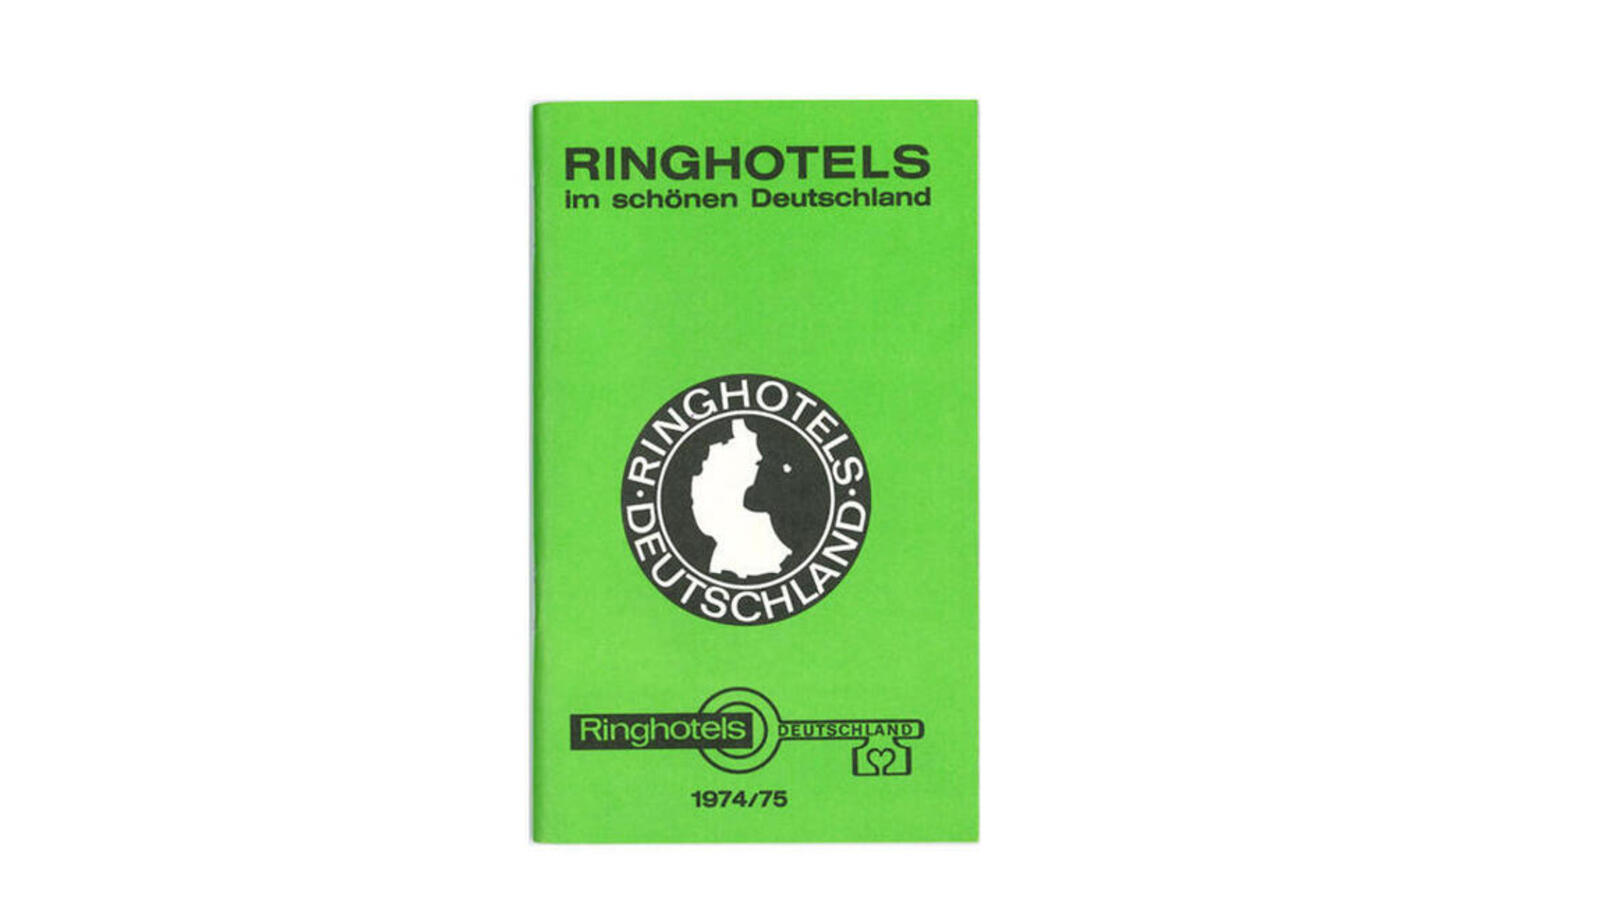 Travel planners from Ringhotels in the 70s